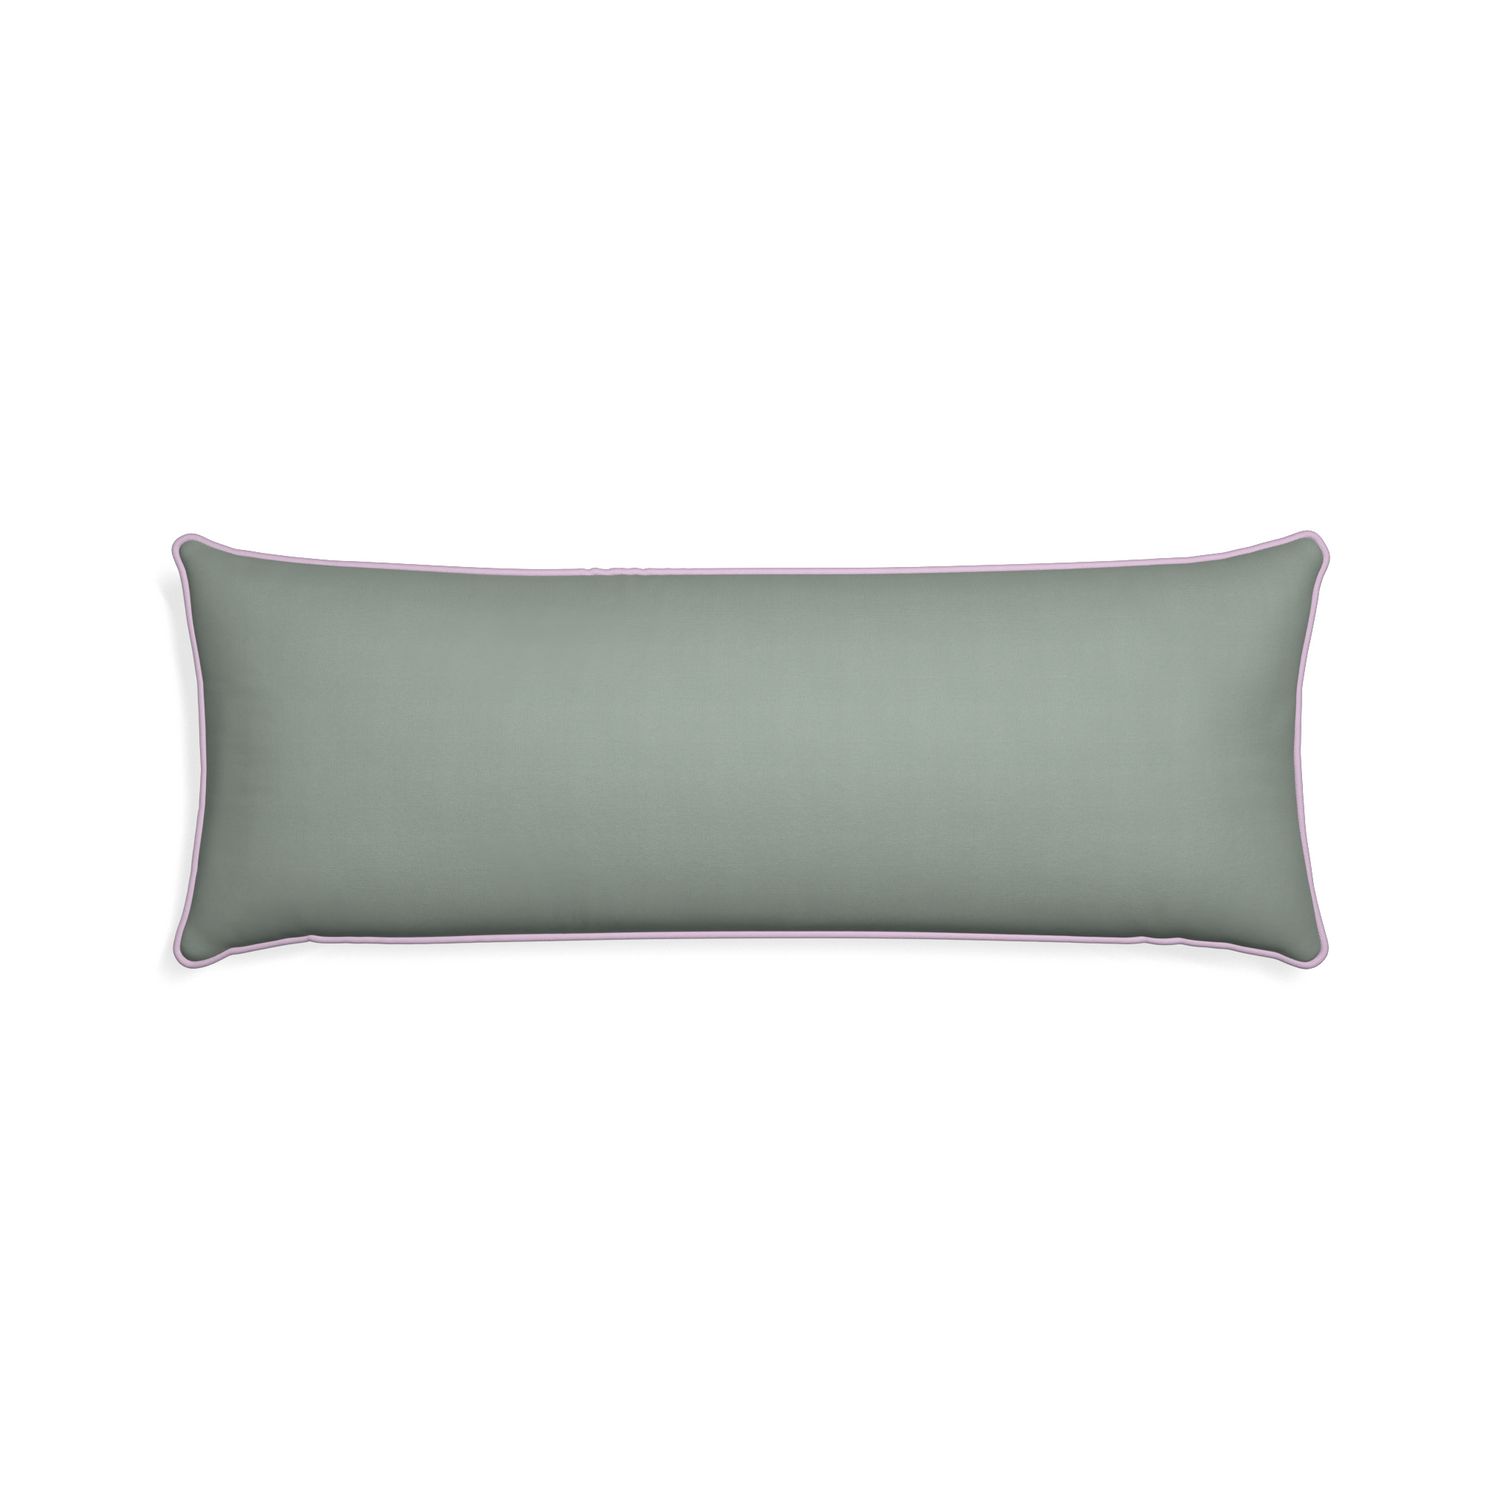 Xl-lumbar sage custom sage green cottonpillow with l piping on white background